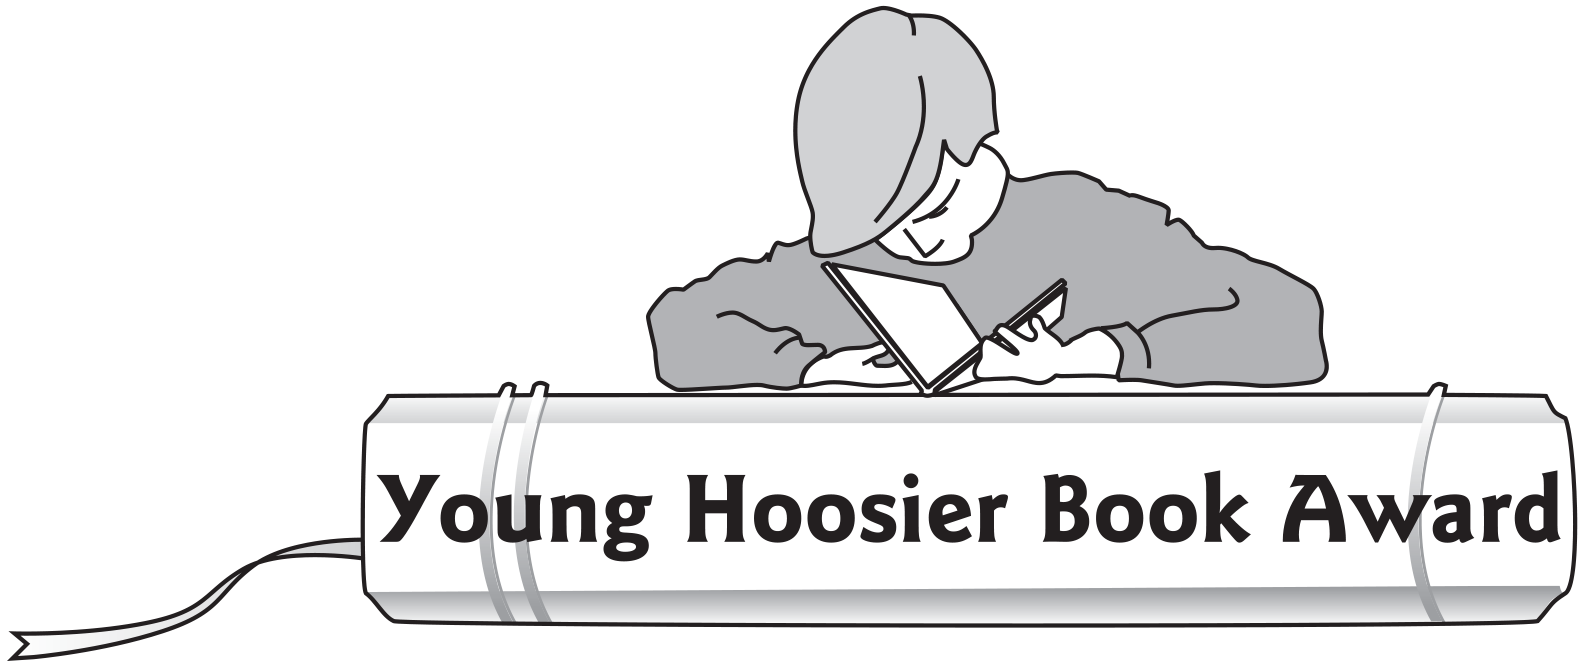 Young Hoosier Book Award Greenwood Public Library Blogs